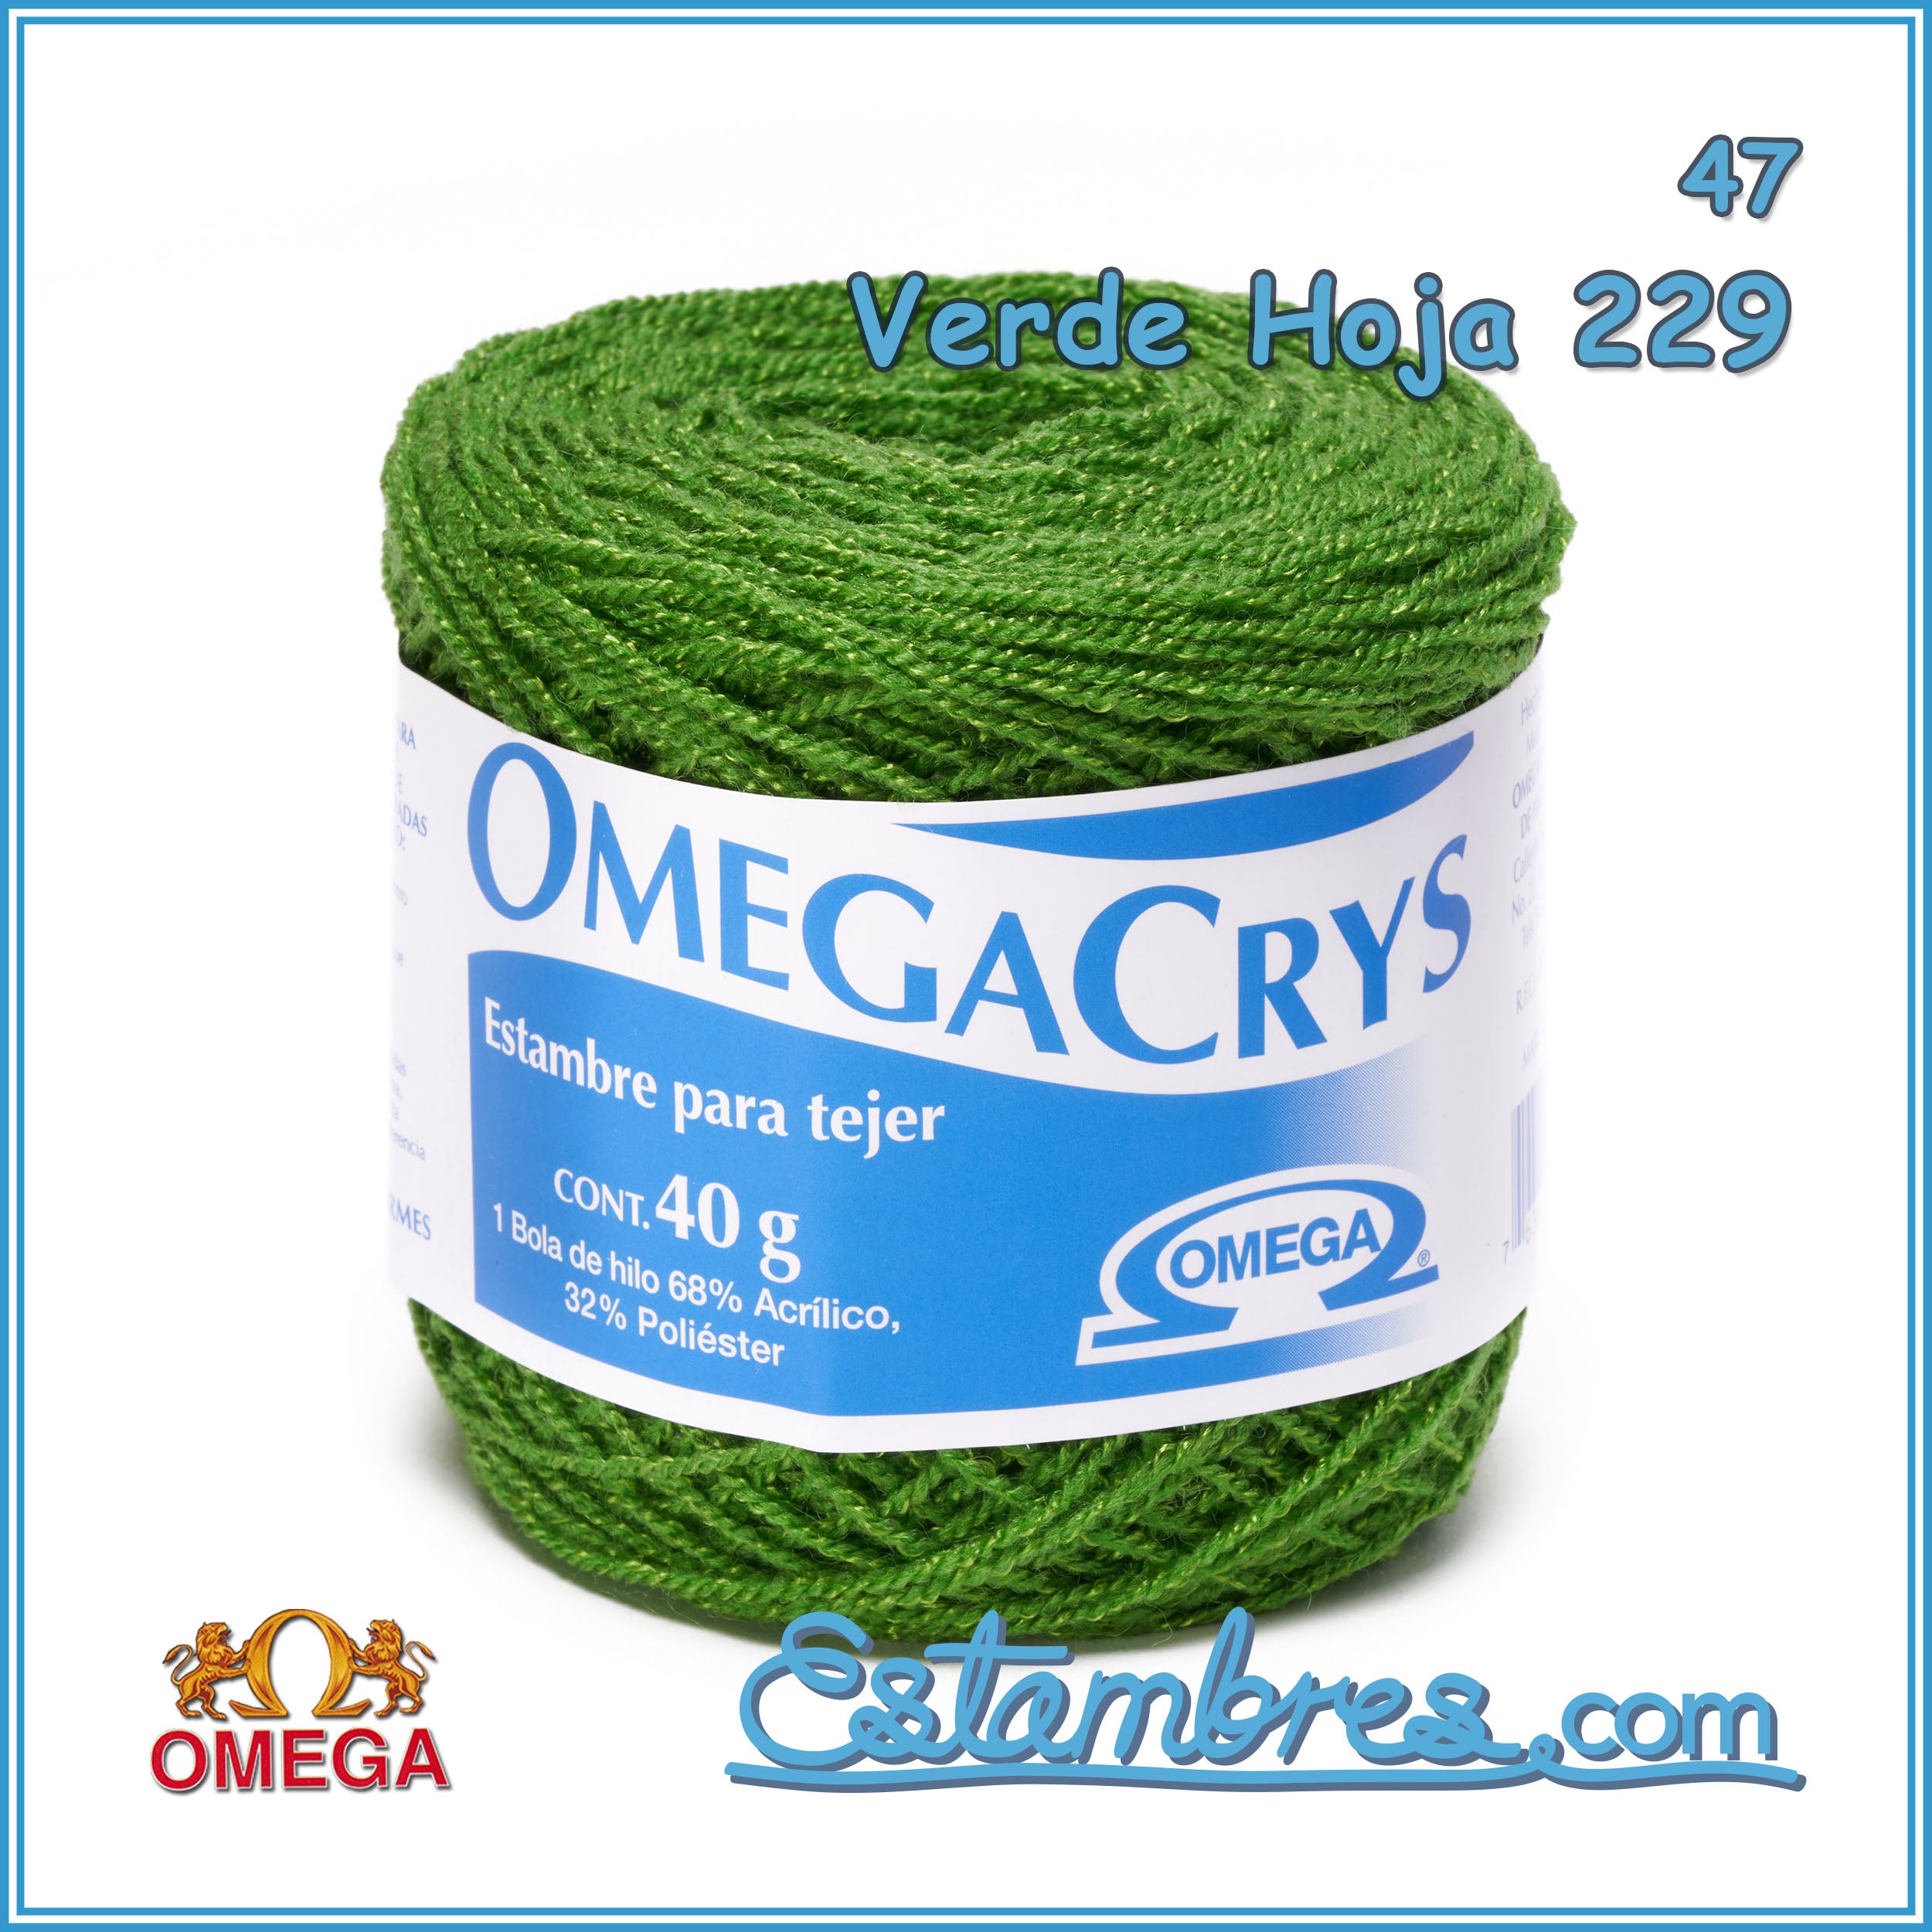 OMEGACRYS [40grs] - 2 of 2